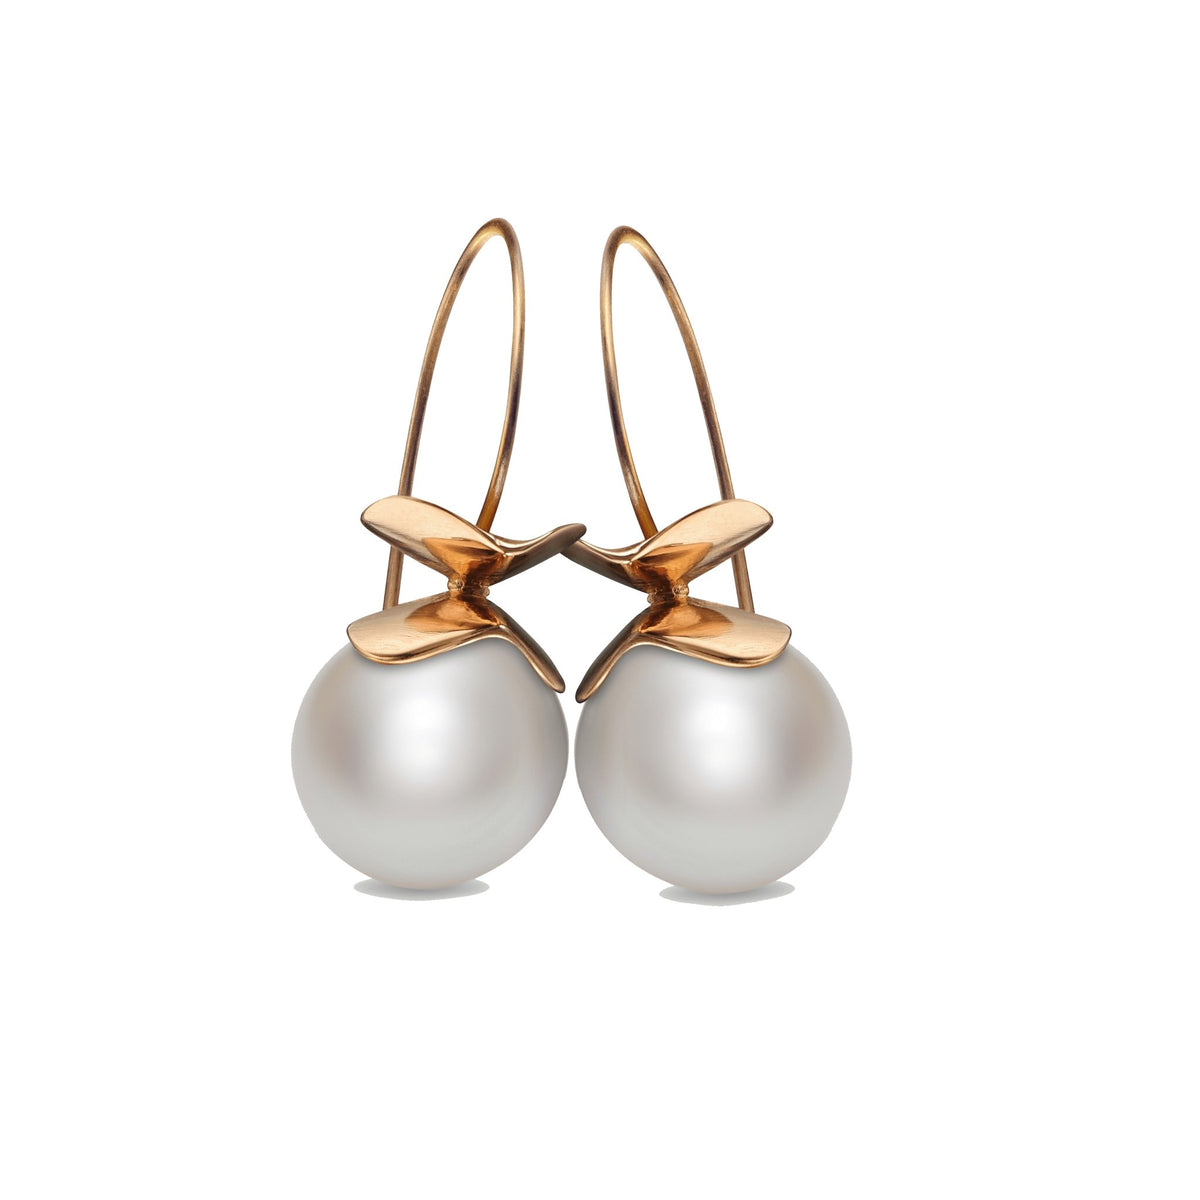 Magnolia Rose South Sea Cultured Pearl Earrings - Ashleigh Branstetter®